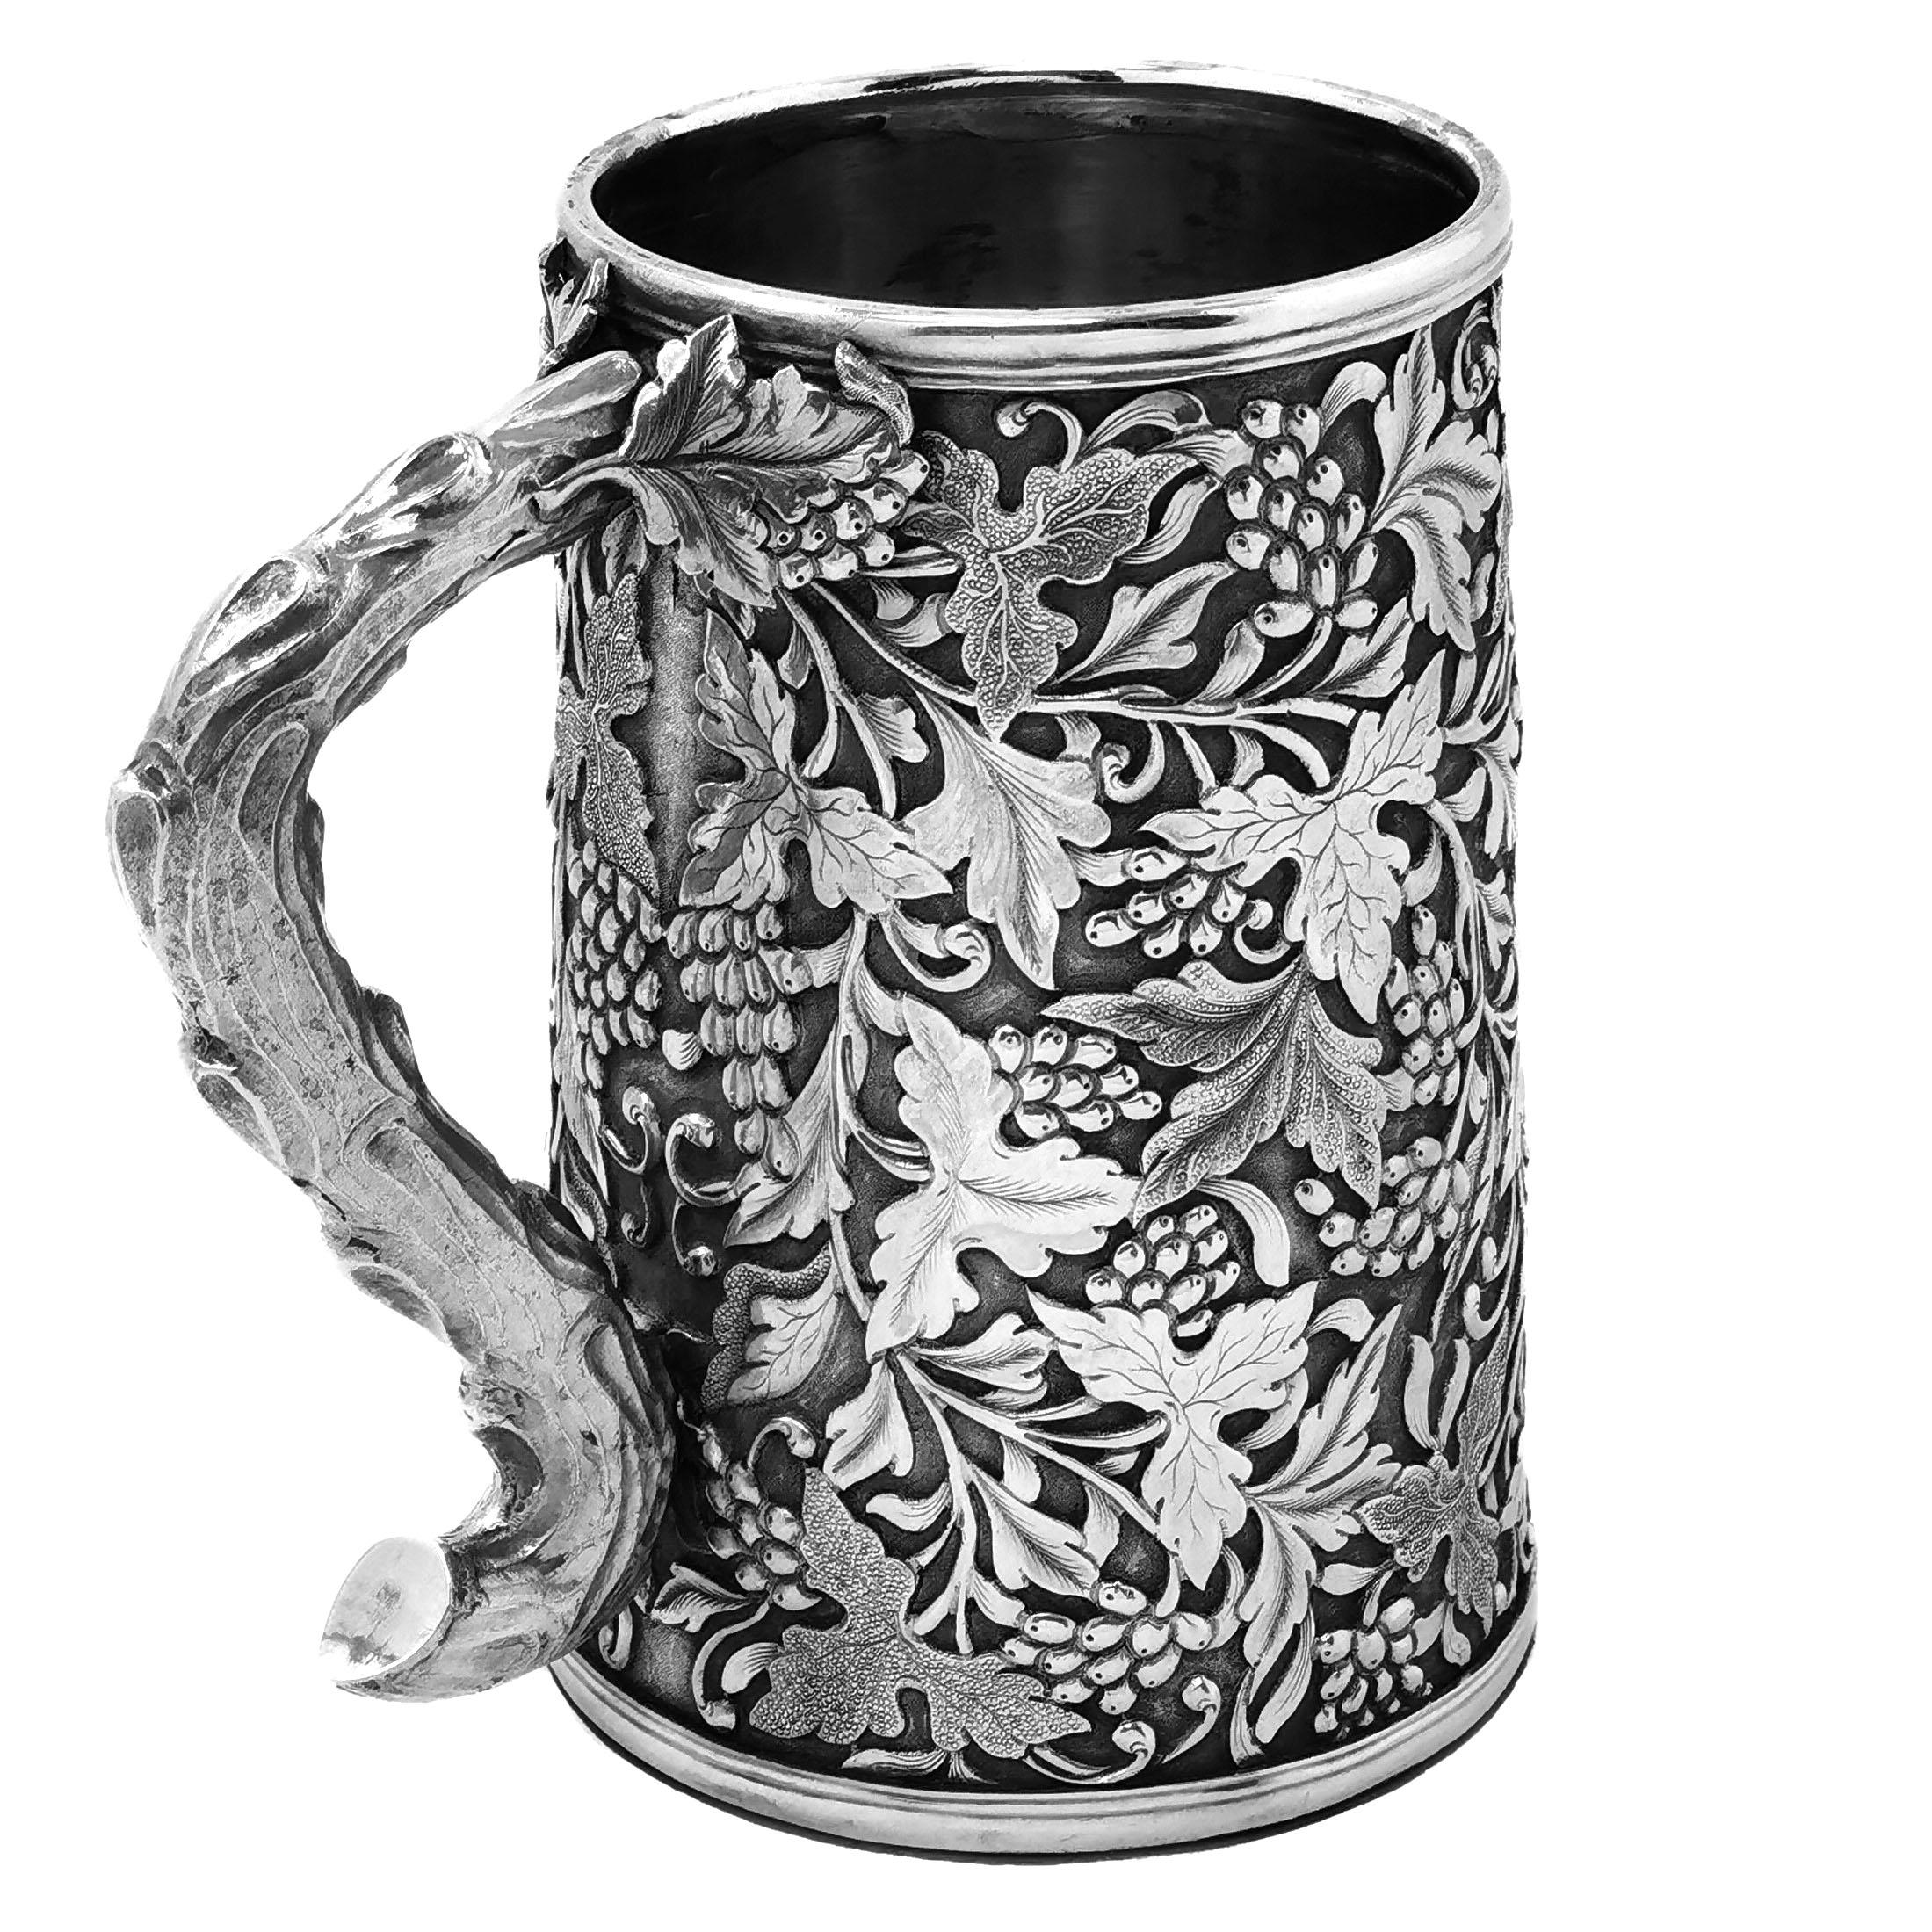 A beautiful Antique Chinese solid Silver Mug showing an ornate grape, vine & leaf design wrapped around the entire body of the Tankard. The Tankard has an impressive vine shaped handle and a blank shield shaped cartouche opposite the handle. 

Made